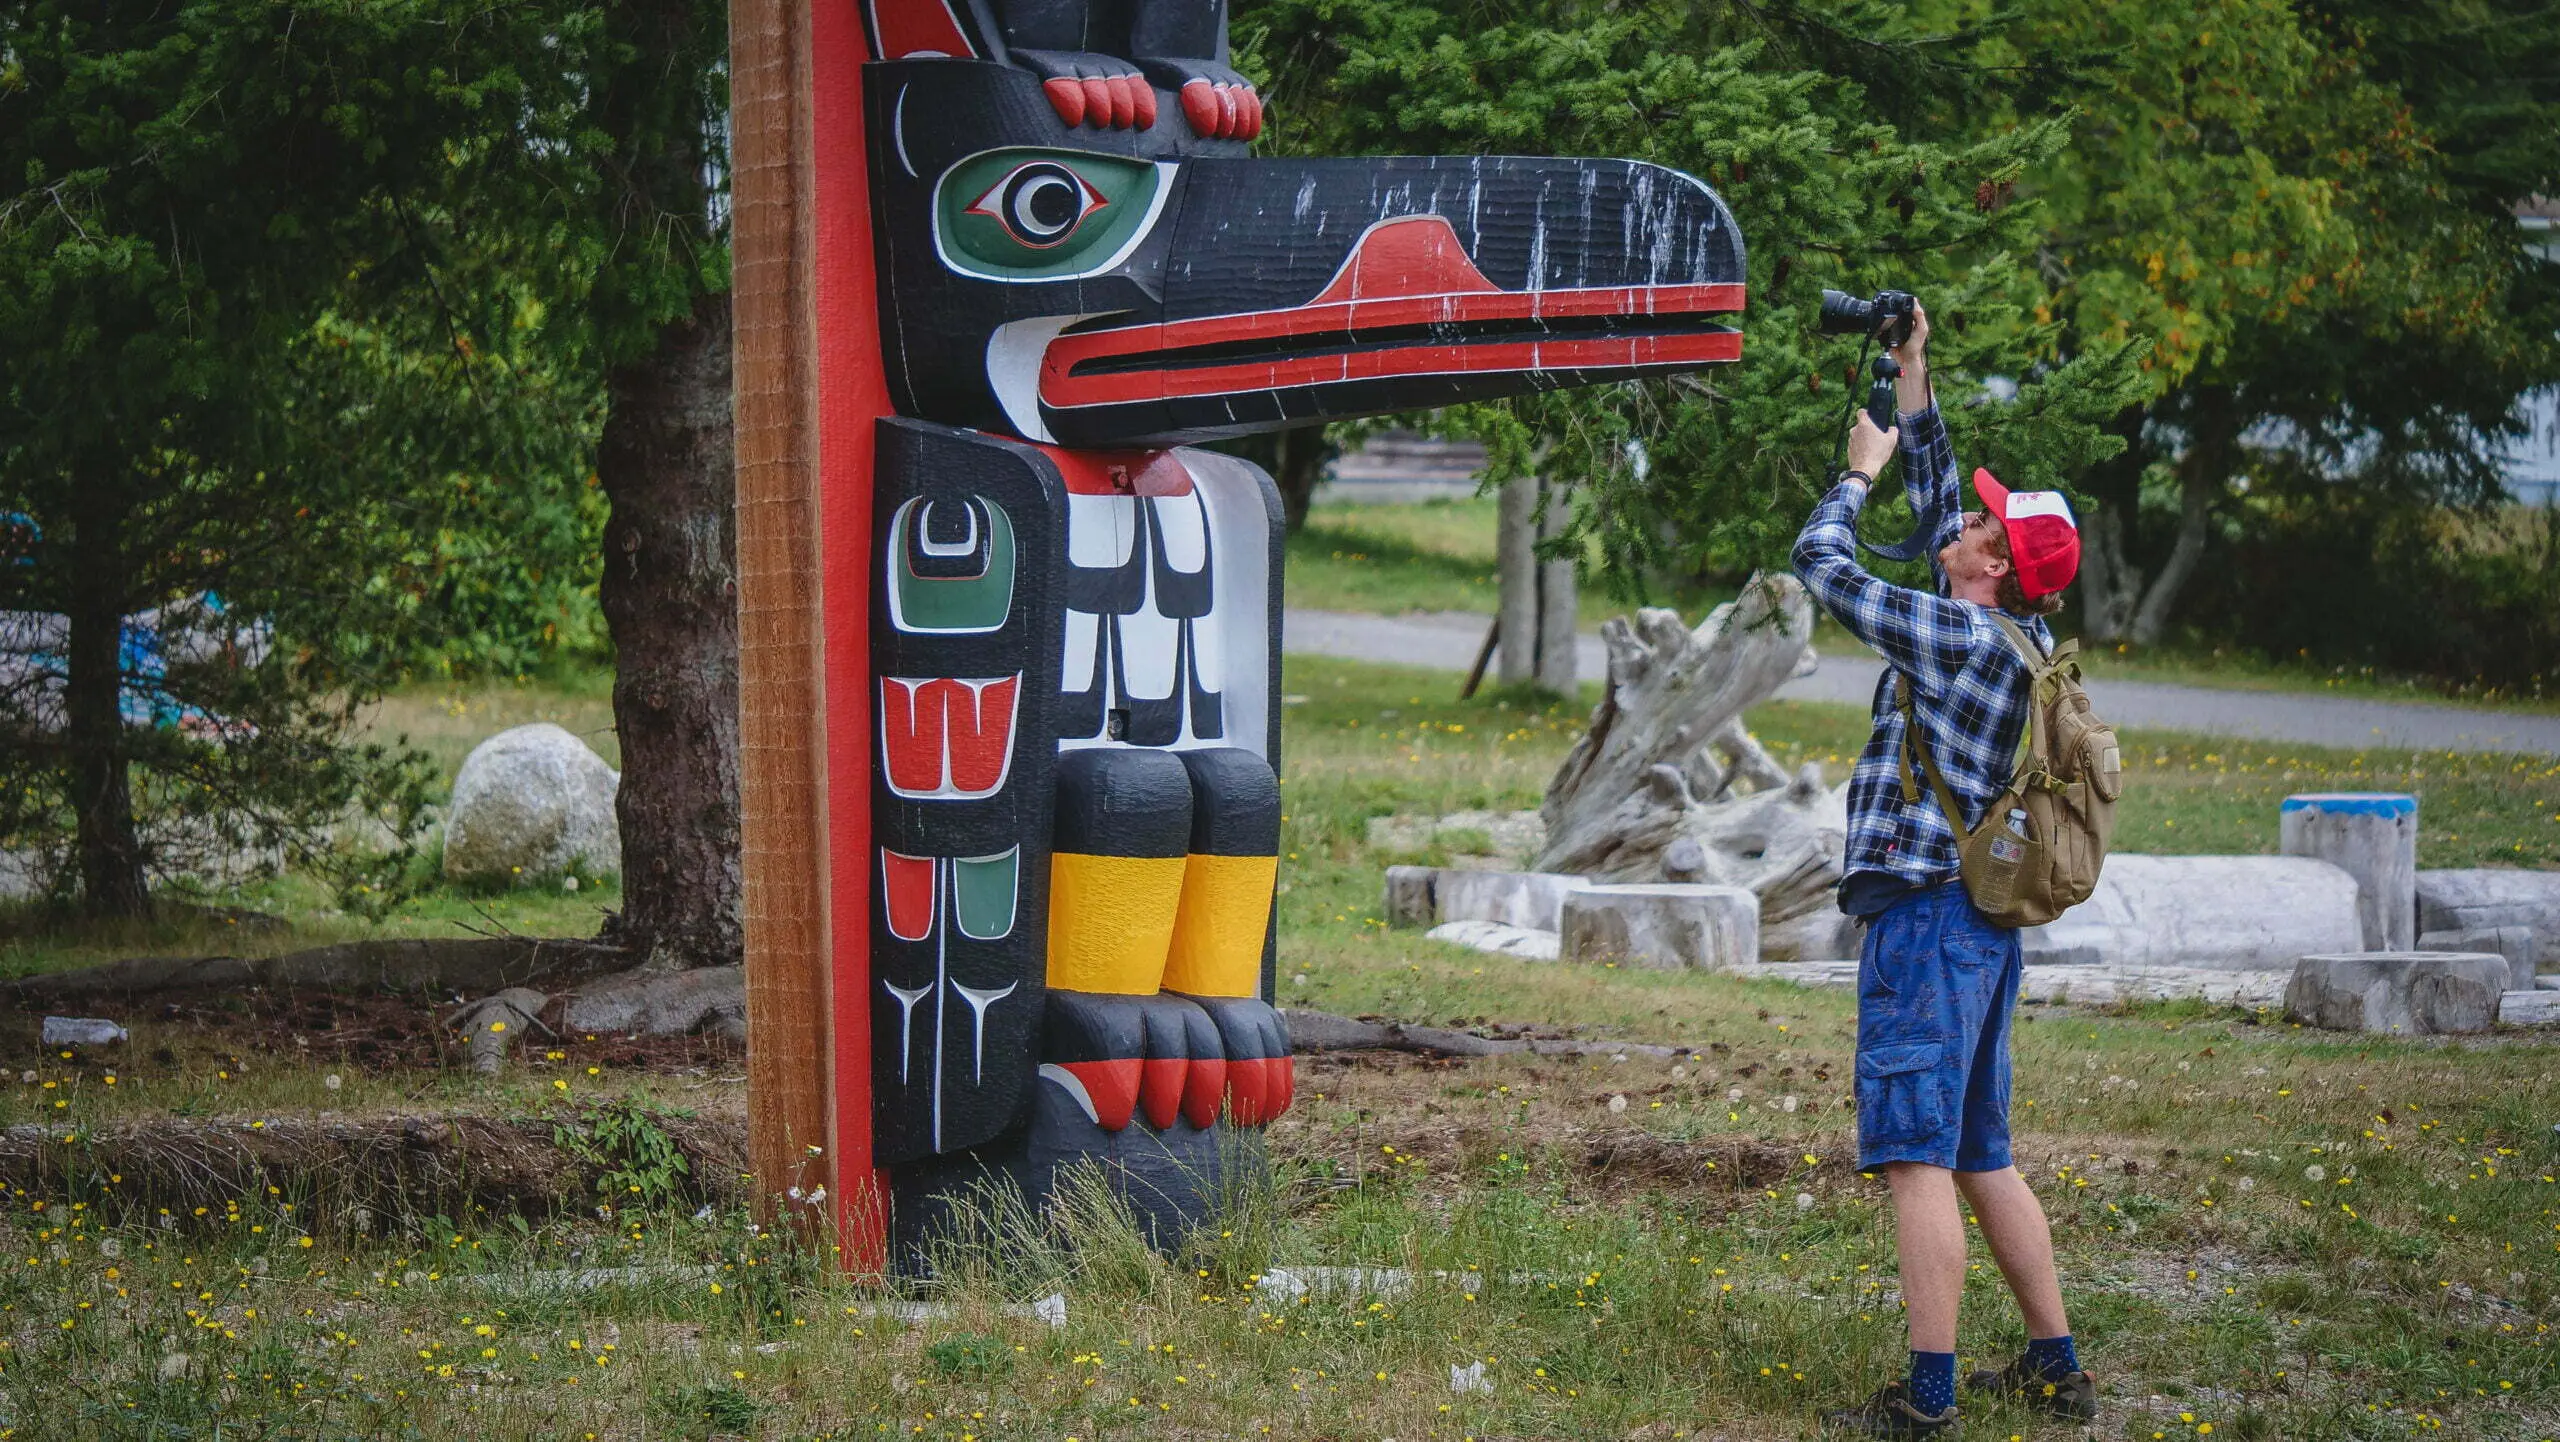 Nomadic Samuel filming while visiting Alert Bay on Vancouver Island, BC, Canada